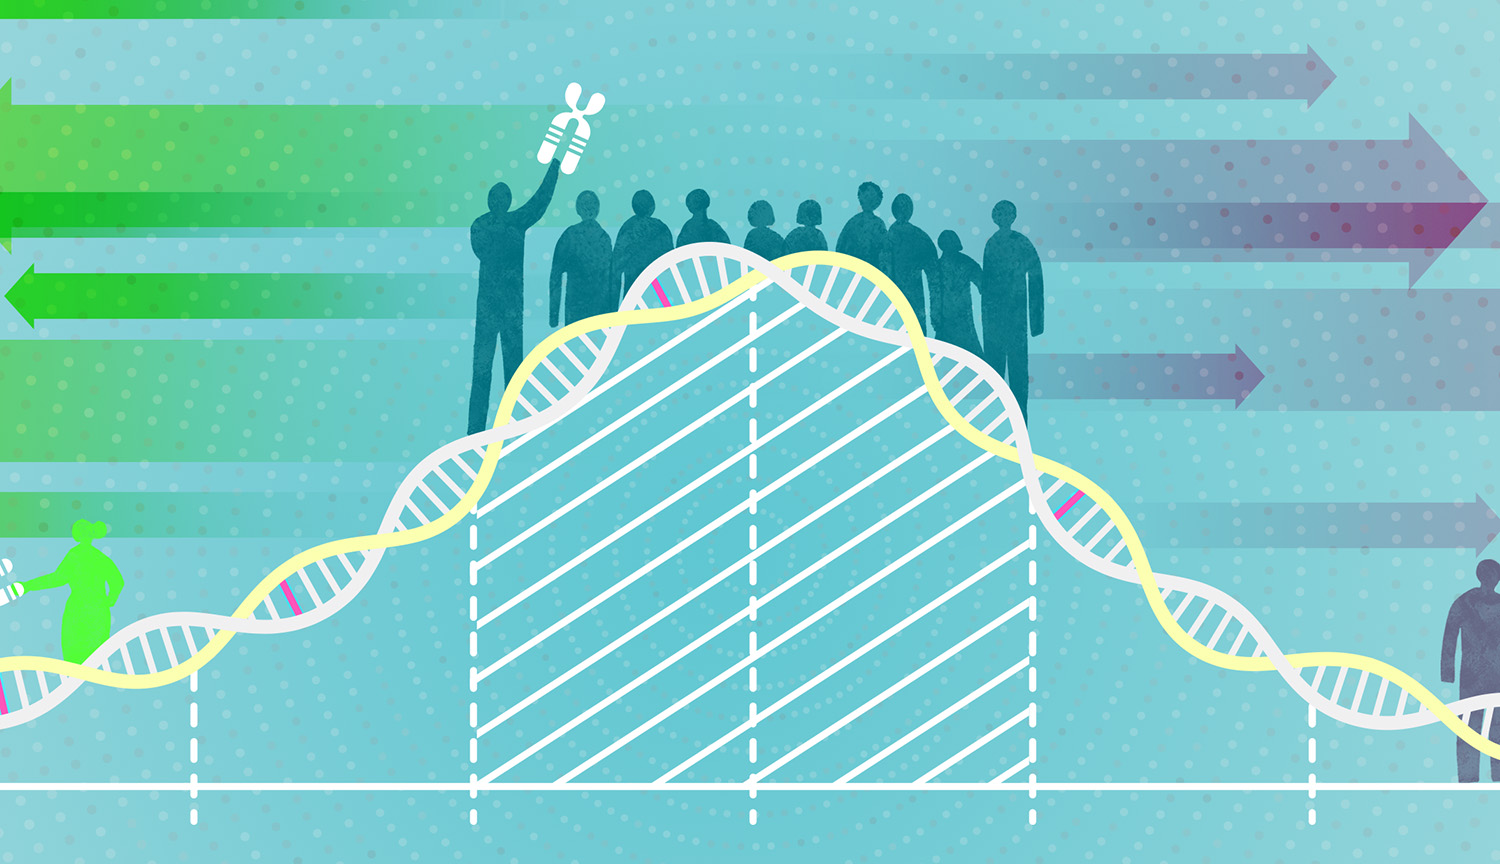 A DNA double helix delineates a line graph with a bell curve shape. A few of the base pairs are highlighted in pink. Human silhouettes appear atop the curve, with most of them in the middle and just a few at the extremes. Some of the people are holding chromosome shapes.